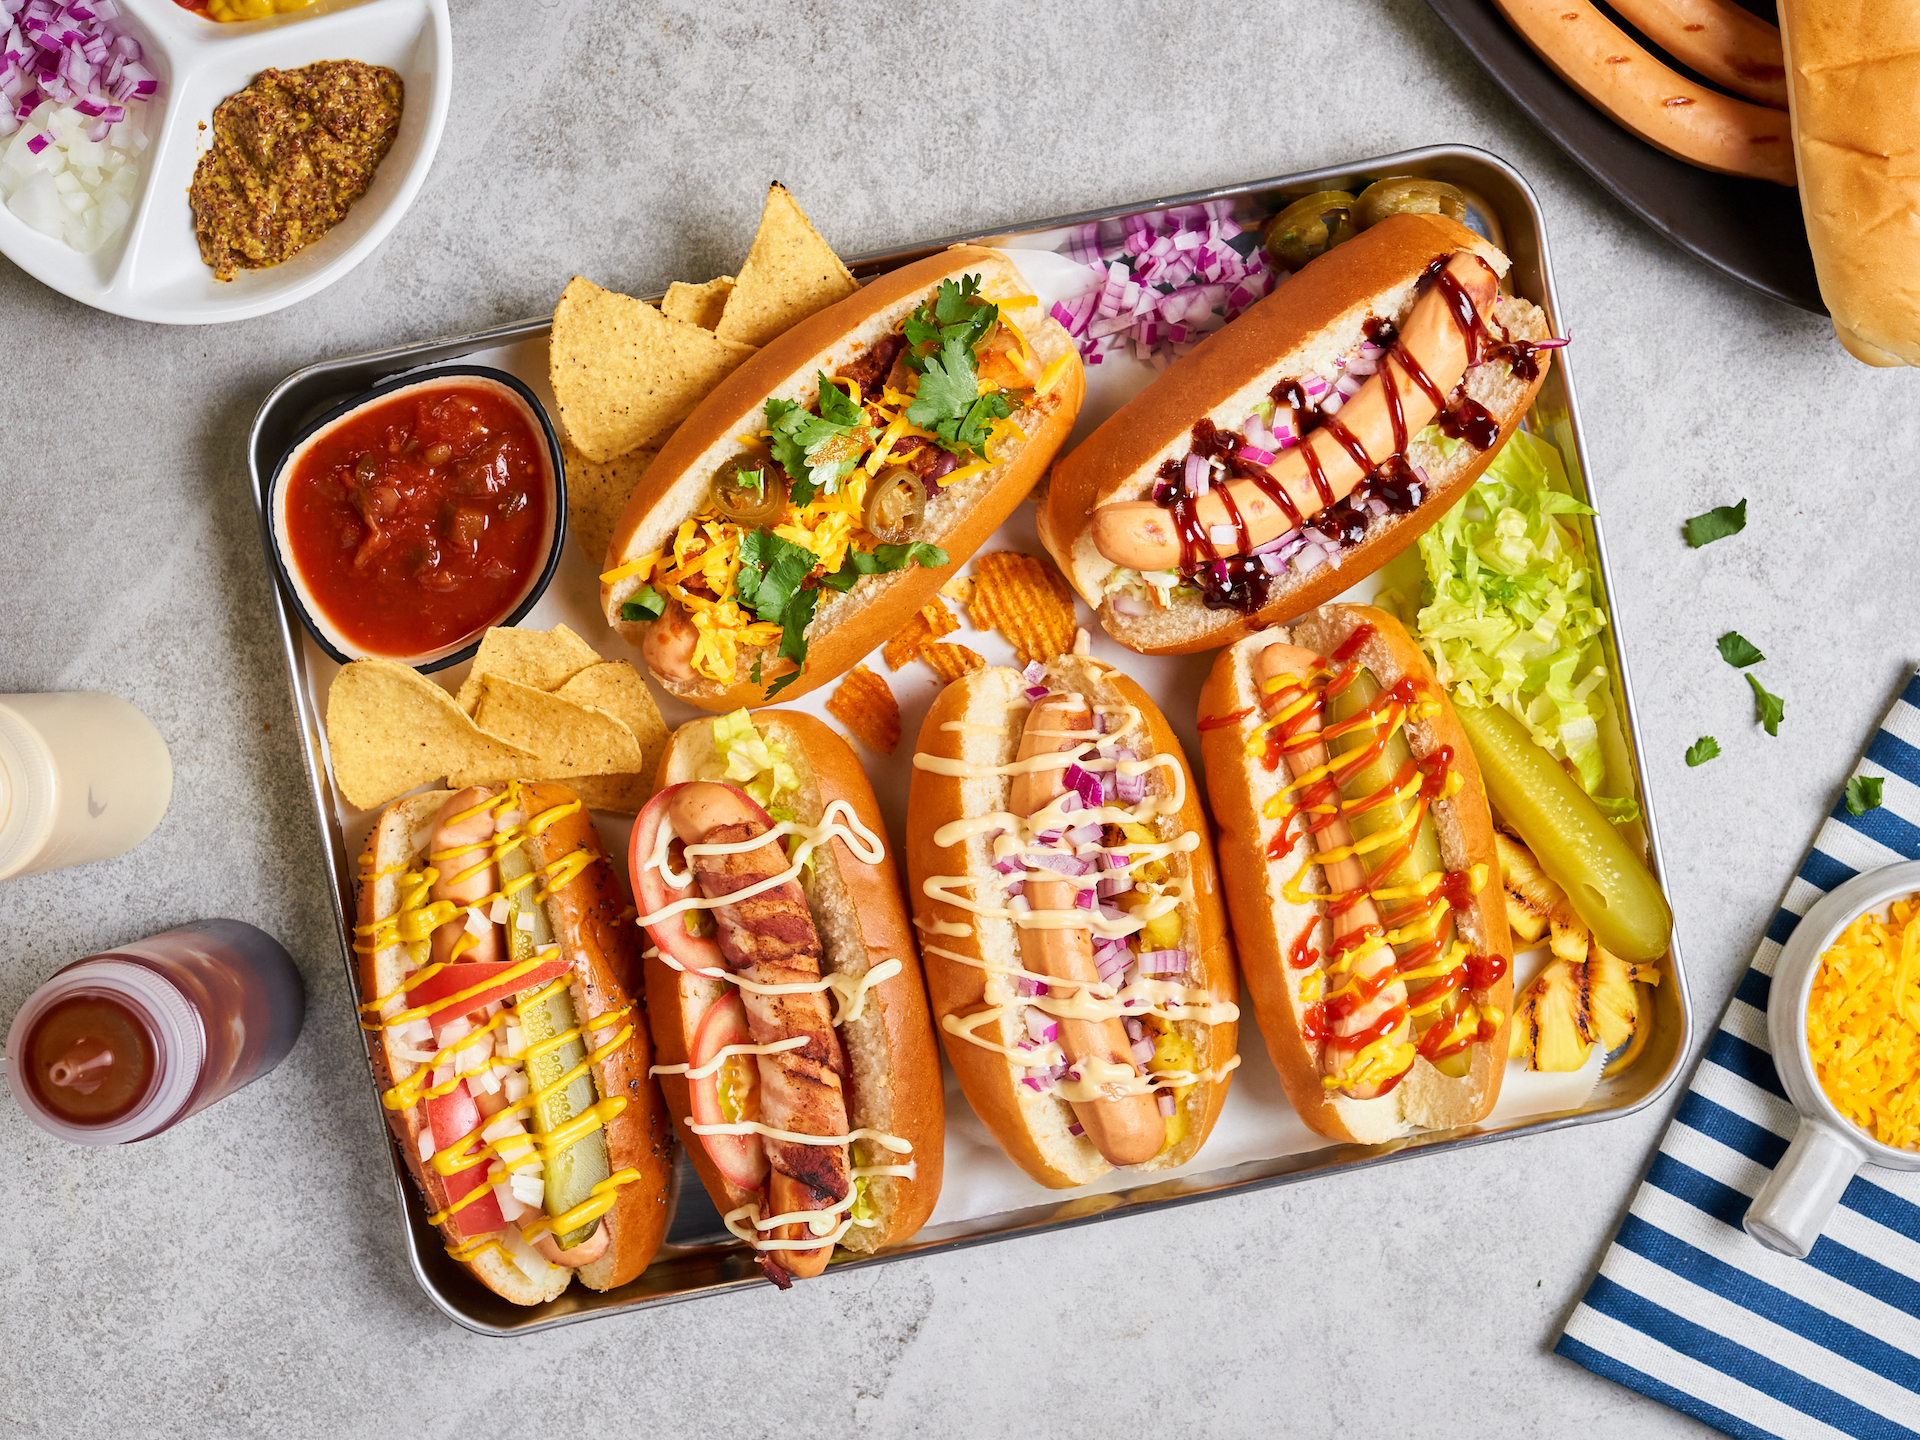 How To Make A Hot Dog Board - Hot Dog Charcuterie Boards